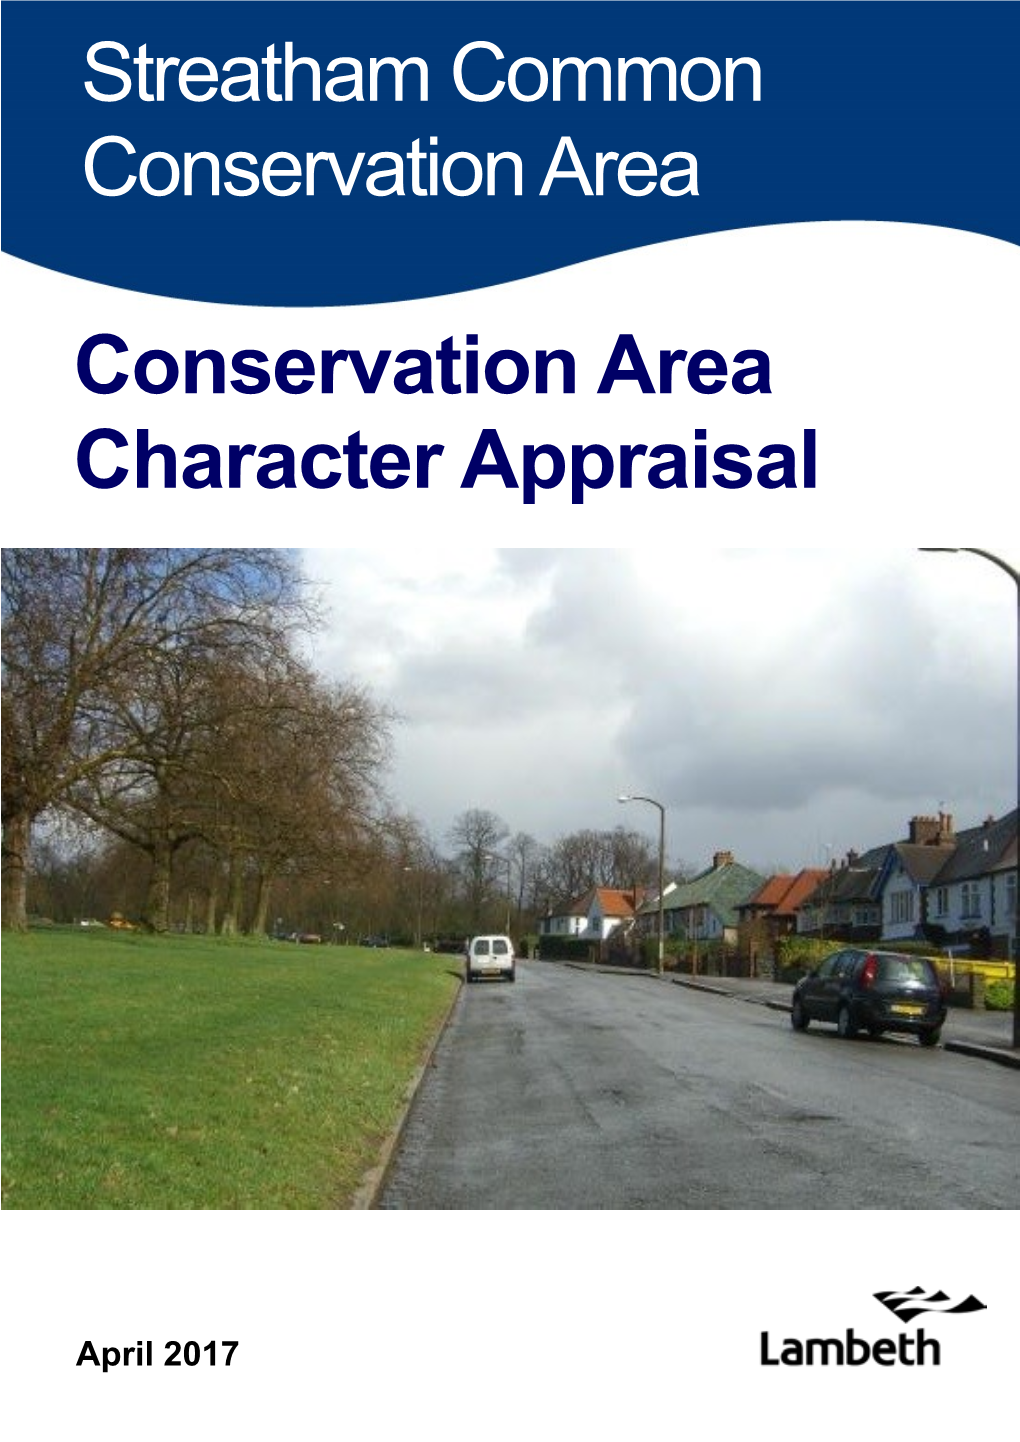 Streatham Common Conservation Area Character Appraisal, 2017